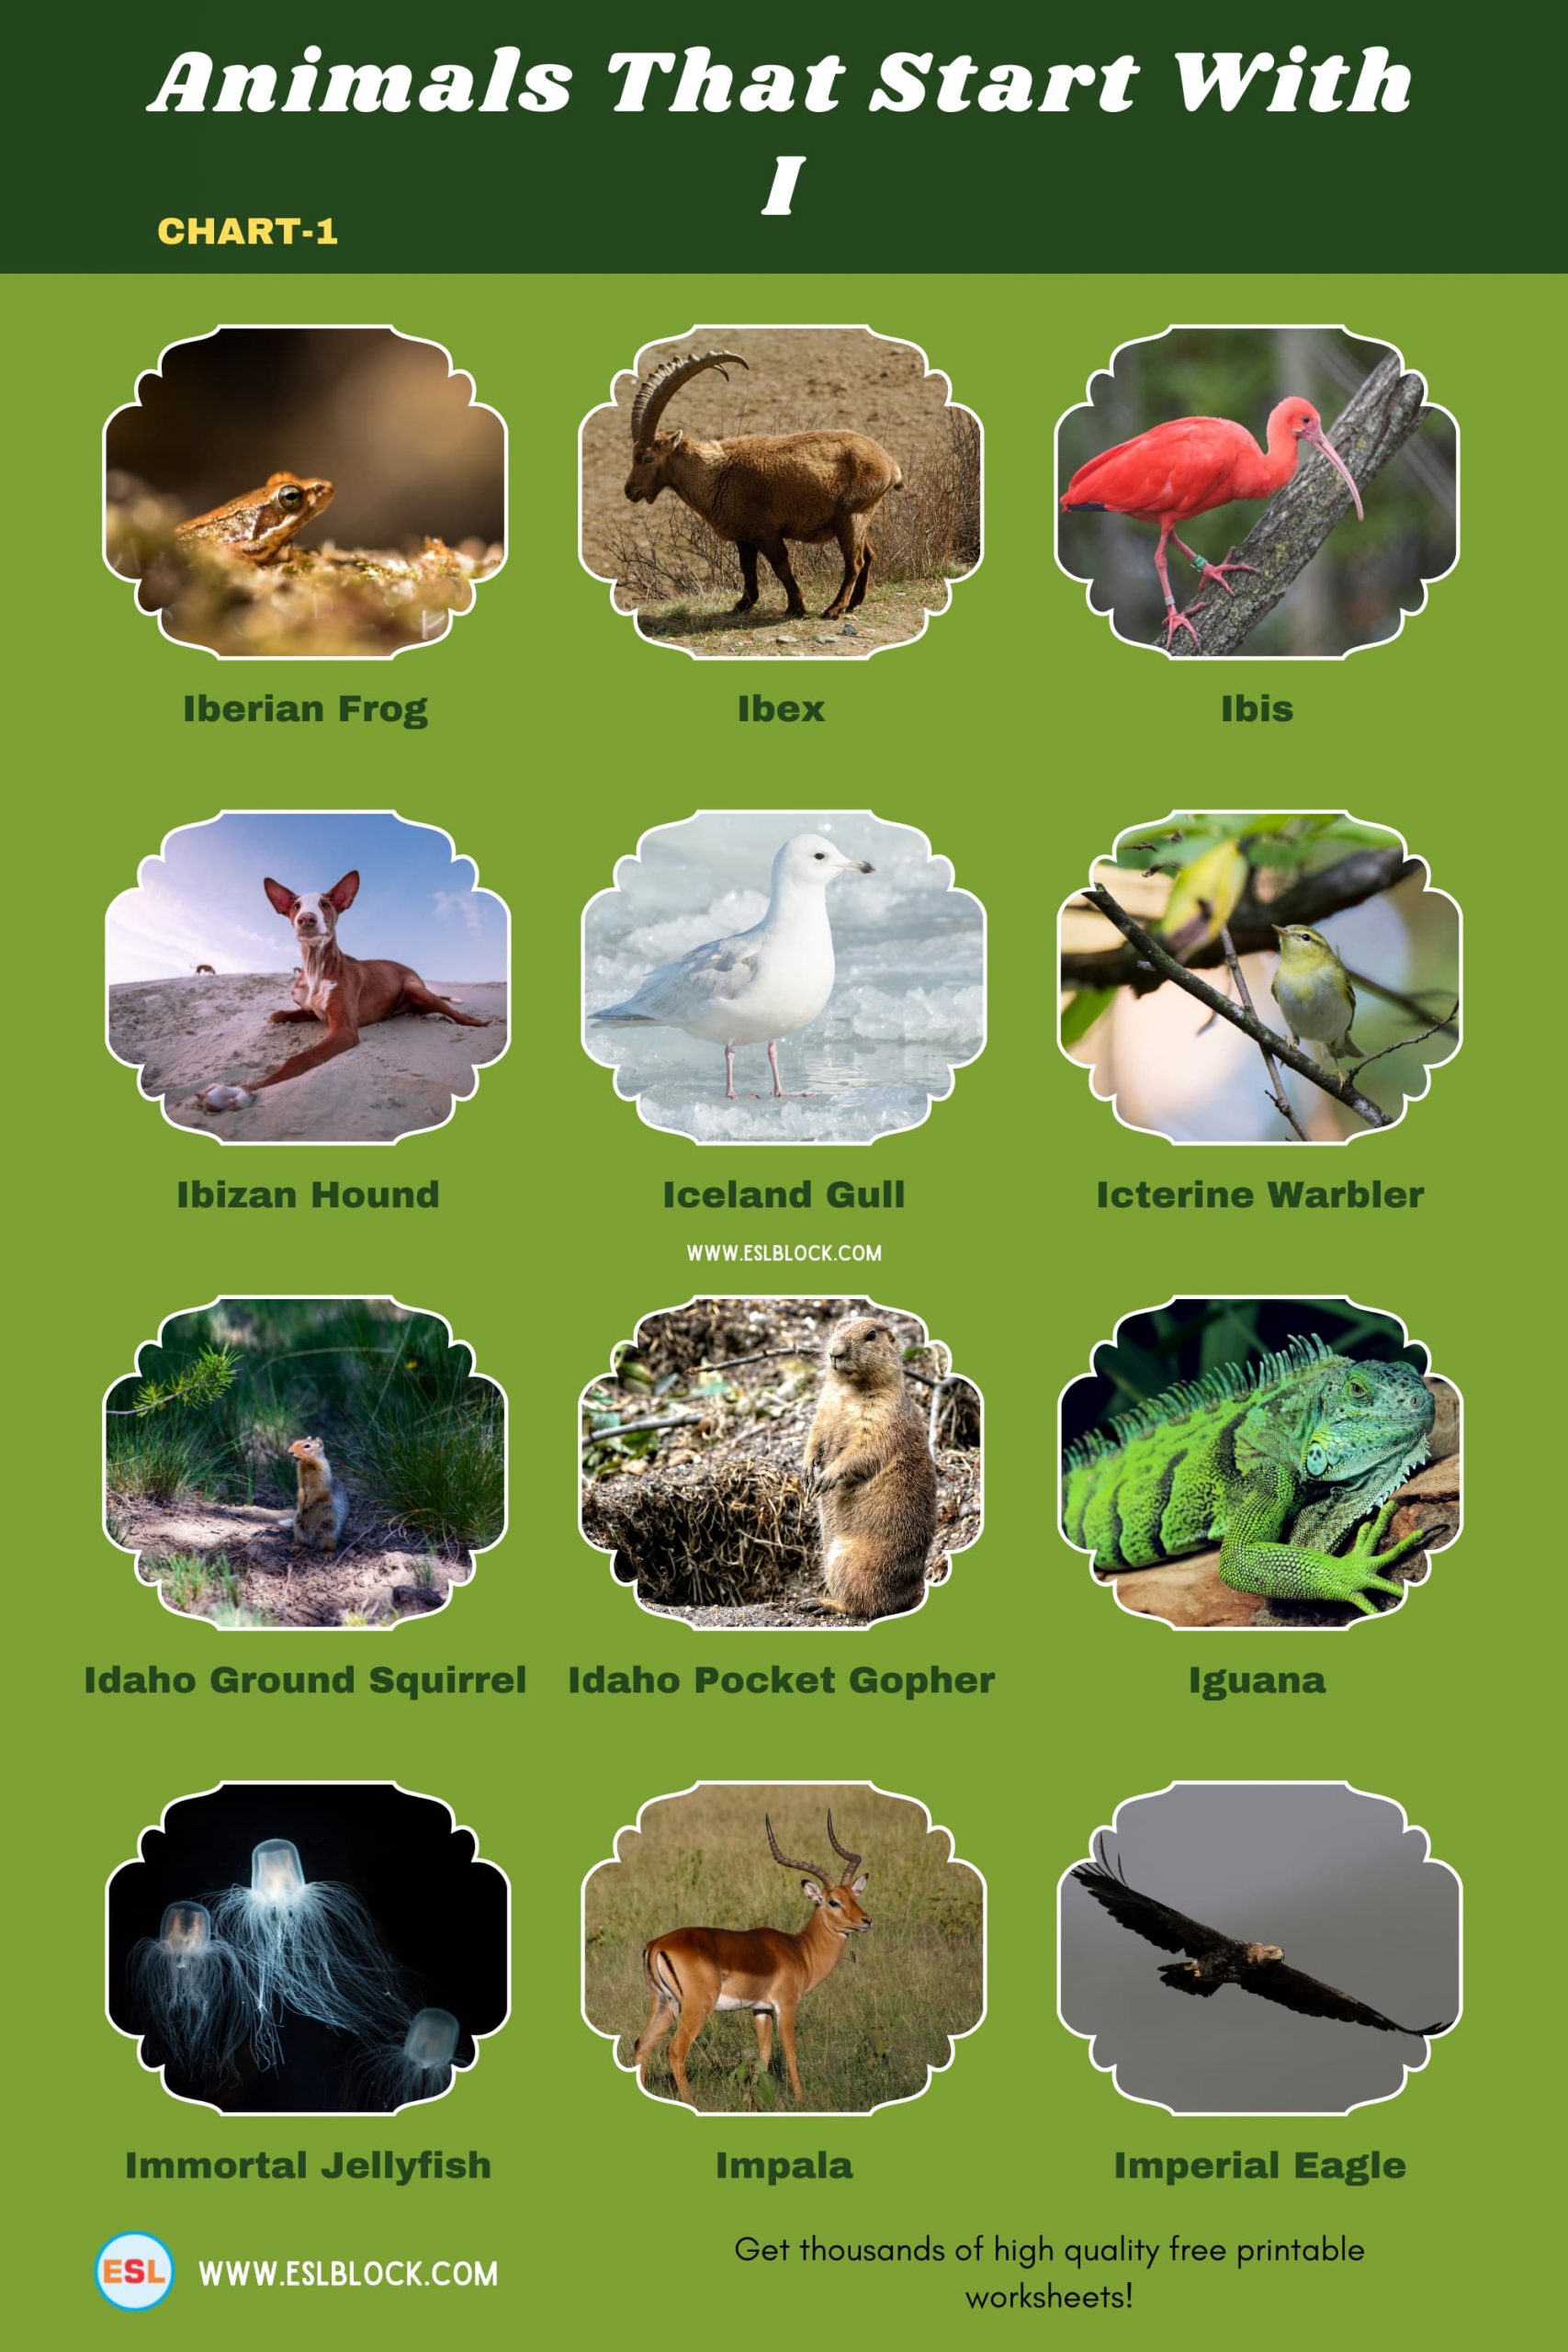 5 Letter Animals Starting With I, Animals List, Animals Names, Animals That Begins With I, Animals That Start With I, English, English Nouns, English Vocabulary, English Words, I Animals, I Animals in English, I Animals Names, List of Animals That Start With I, Nouns, Vocabulary